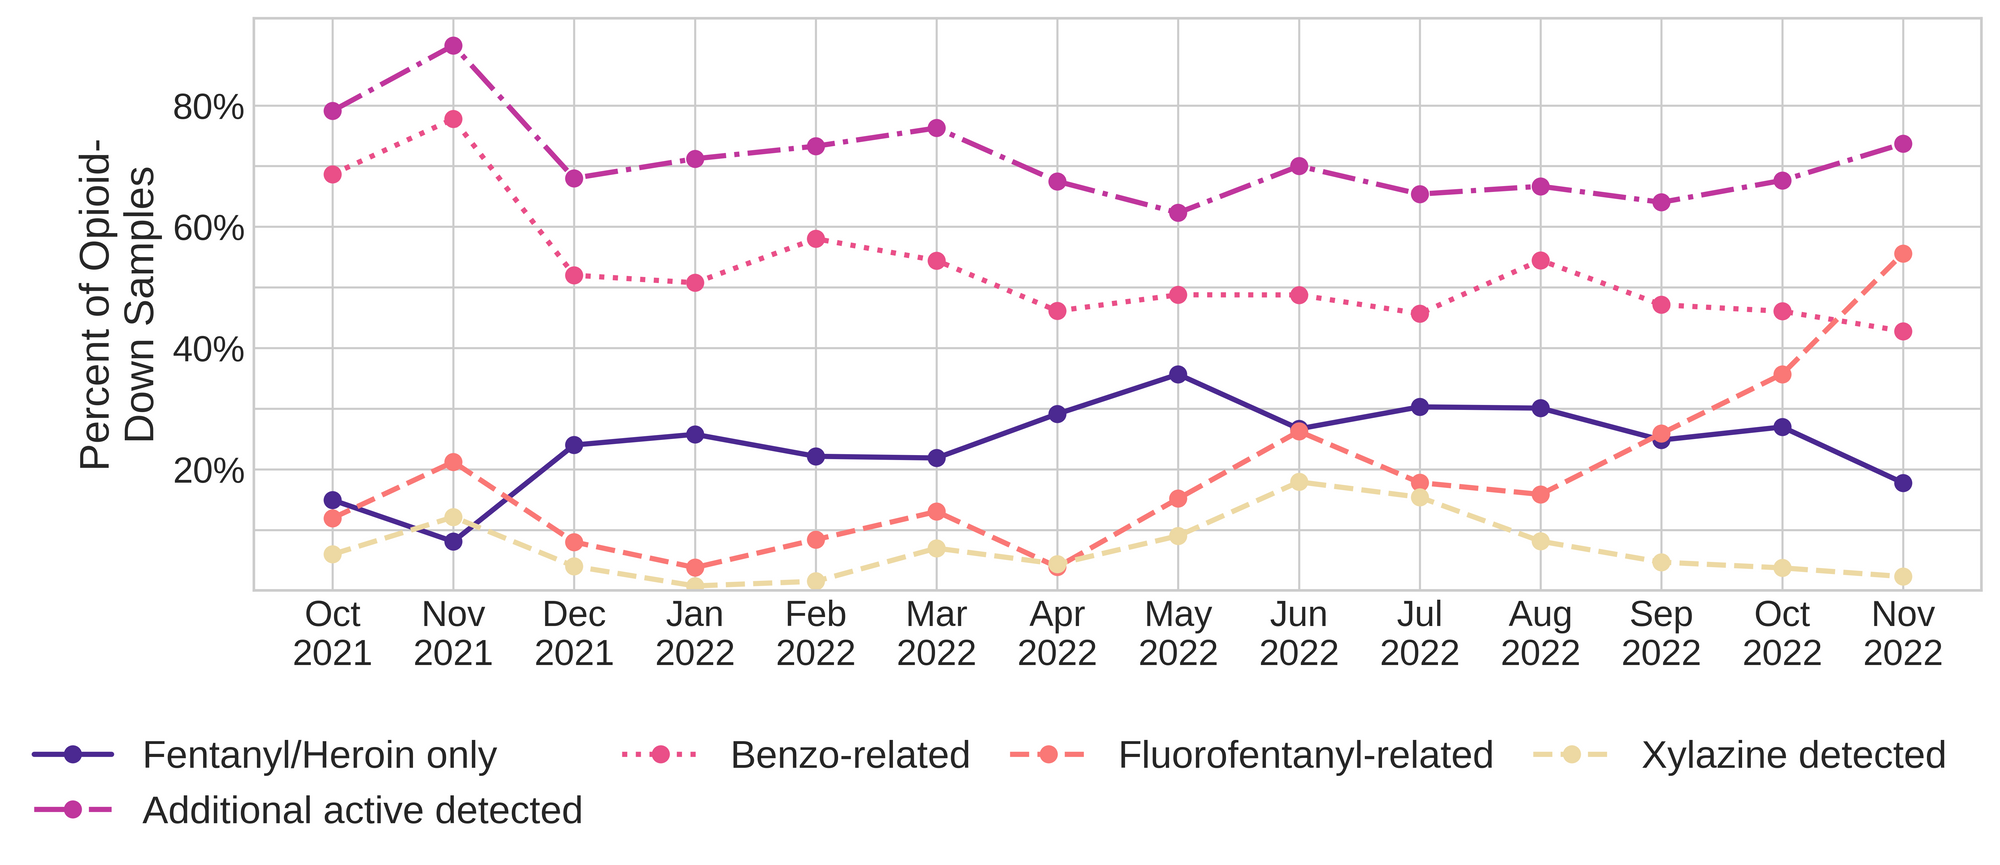 Figure 3. The percentage of expected opioid-down samples checked between November 2021 and November 2022 that only contained fentanyl/heroin actives (solid dark purple), opioid-down samples with an additional active detected (dot-dashed magenta), opioid-down samples that contained a benzodiazepine-related drug (dotted pink), opioid-down samples that contained fluorofentanyl (dashed salmon), and opioid-down samples that contained xylazine (dashed yellow).